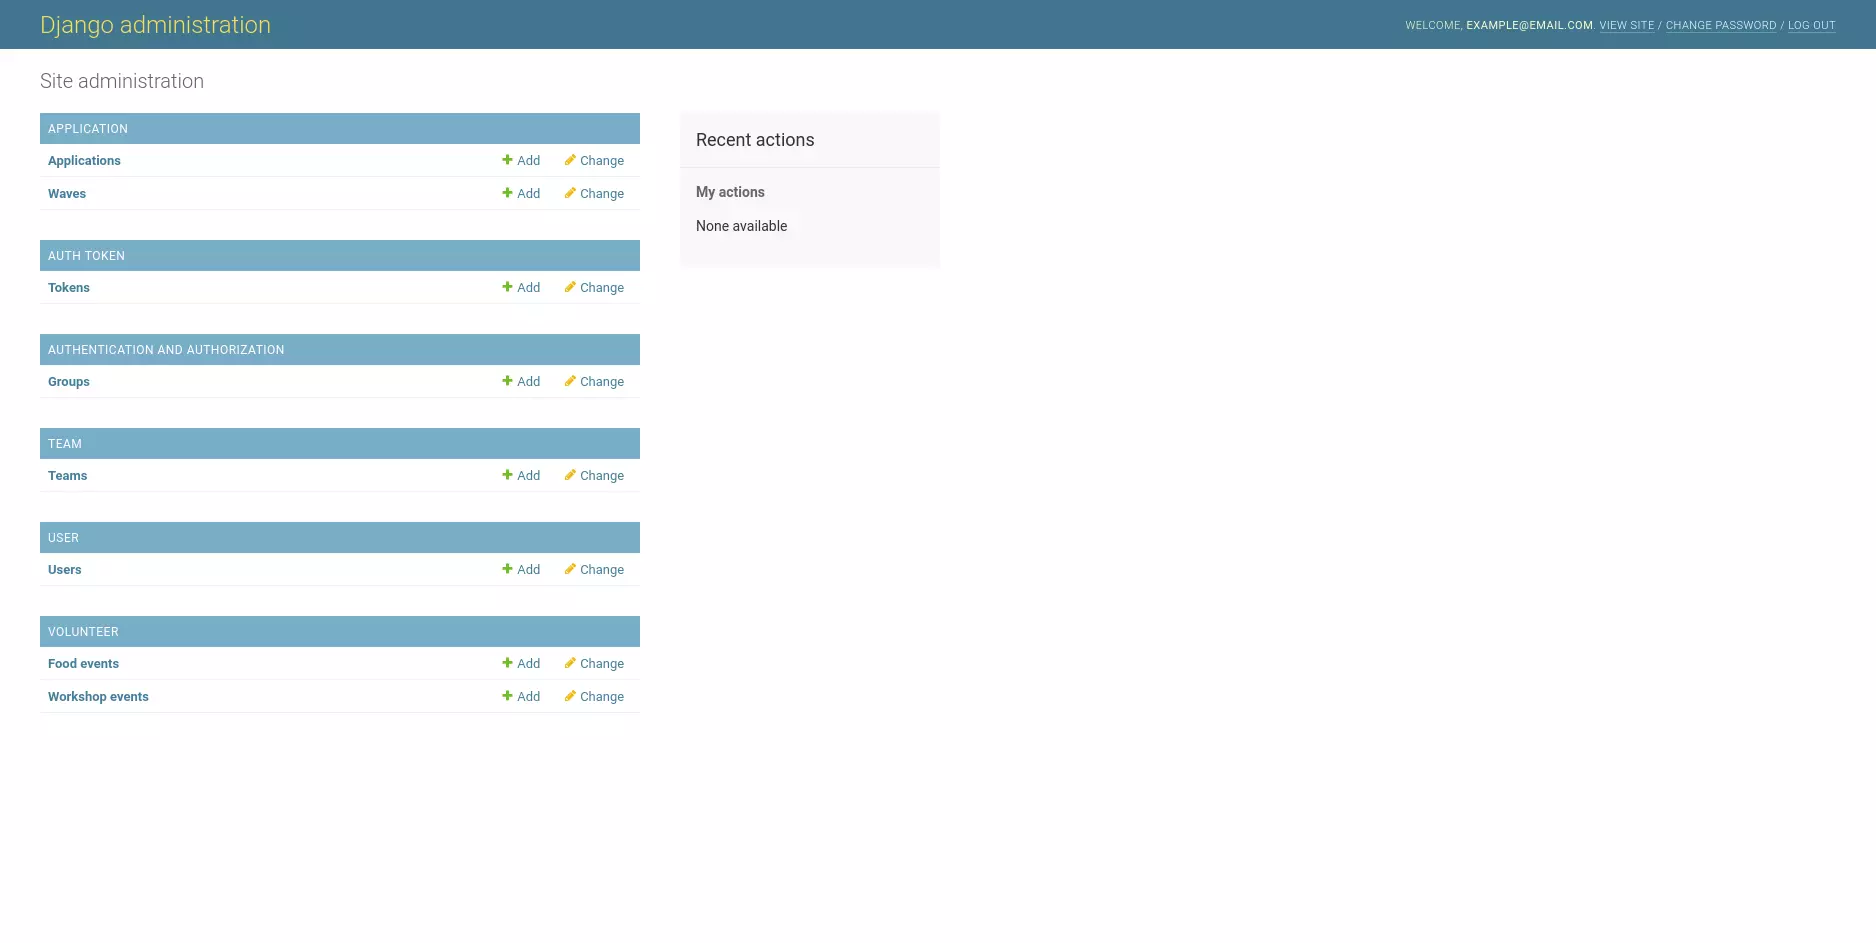 A screenshot of the Ouroboros admin panel, showing the various aspects of the system that are modifiable.